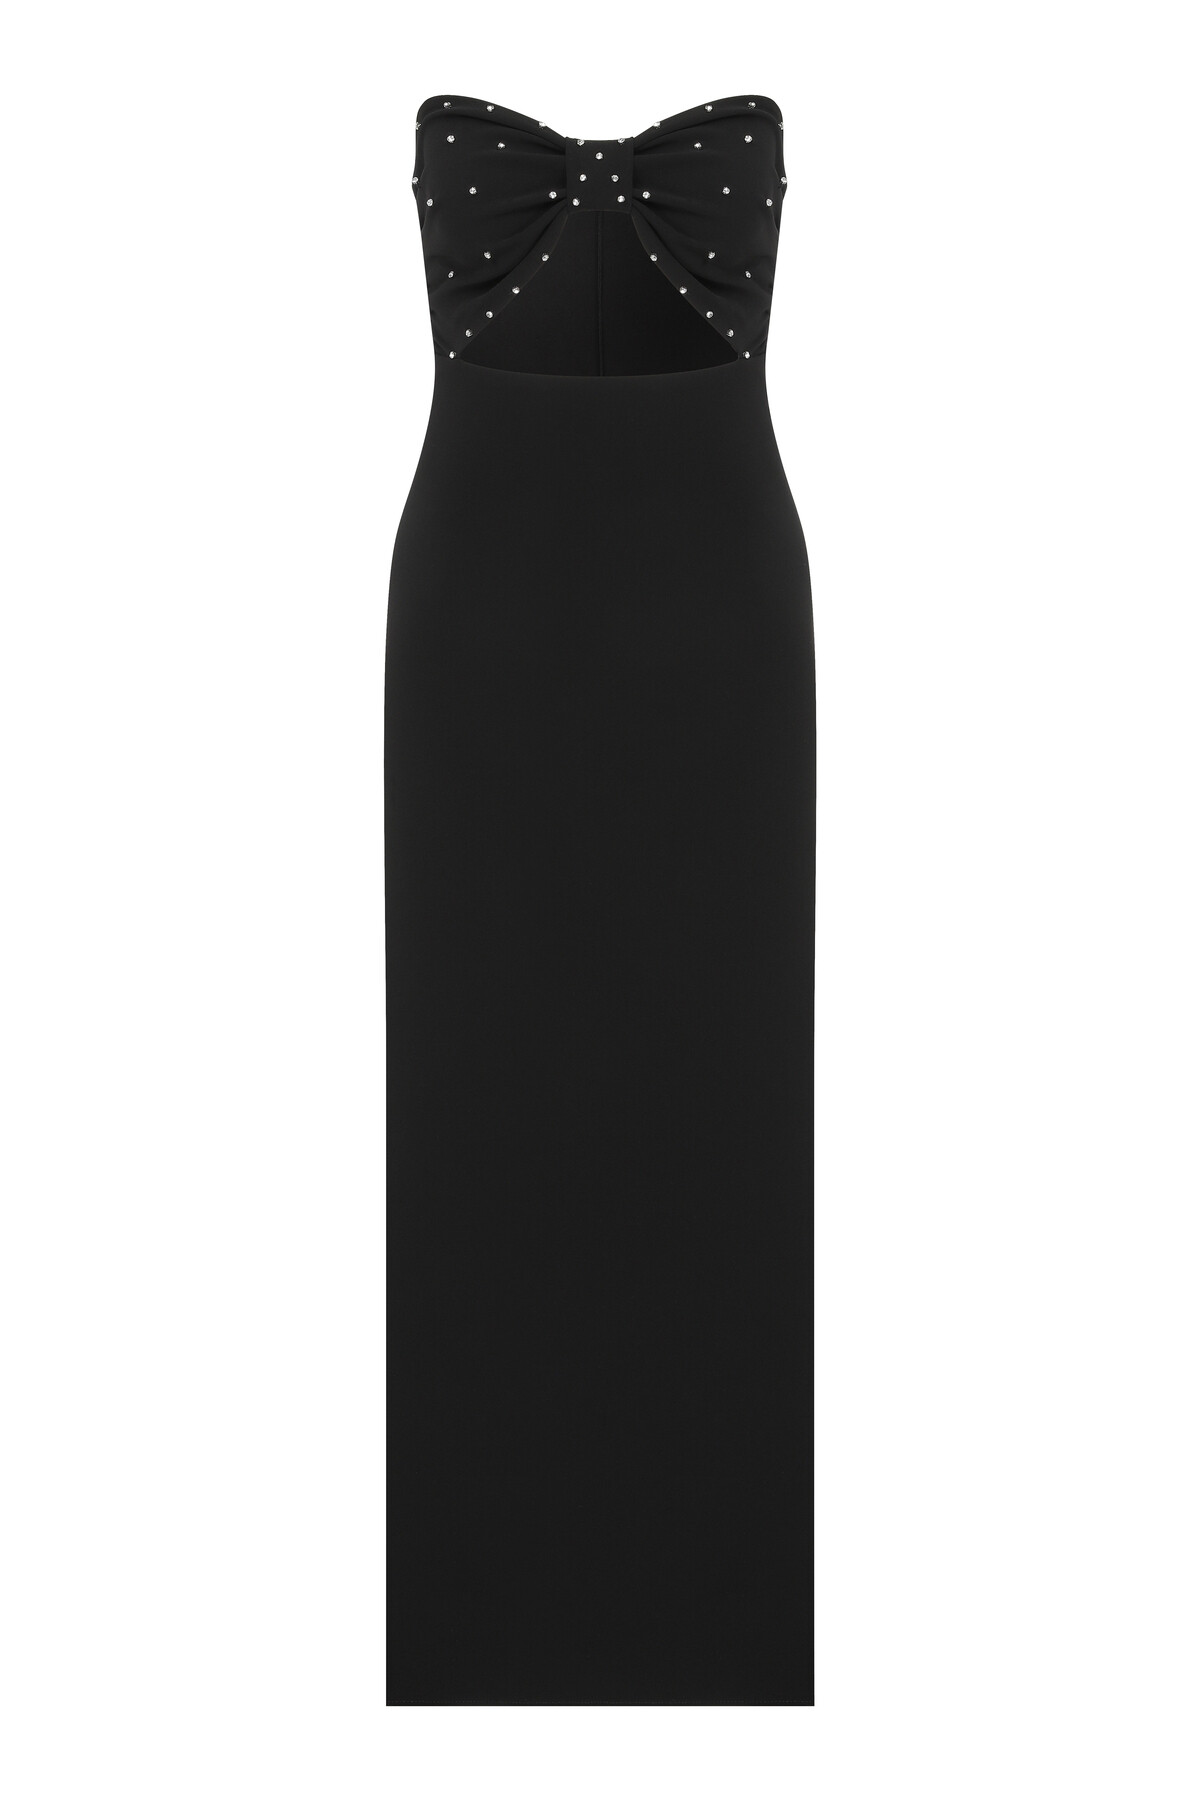 NORAH Crystal Embellished Strapless Cut-Out Dress